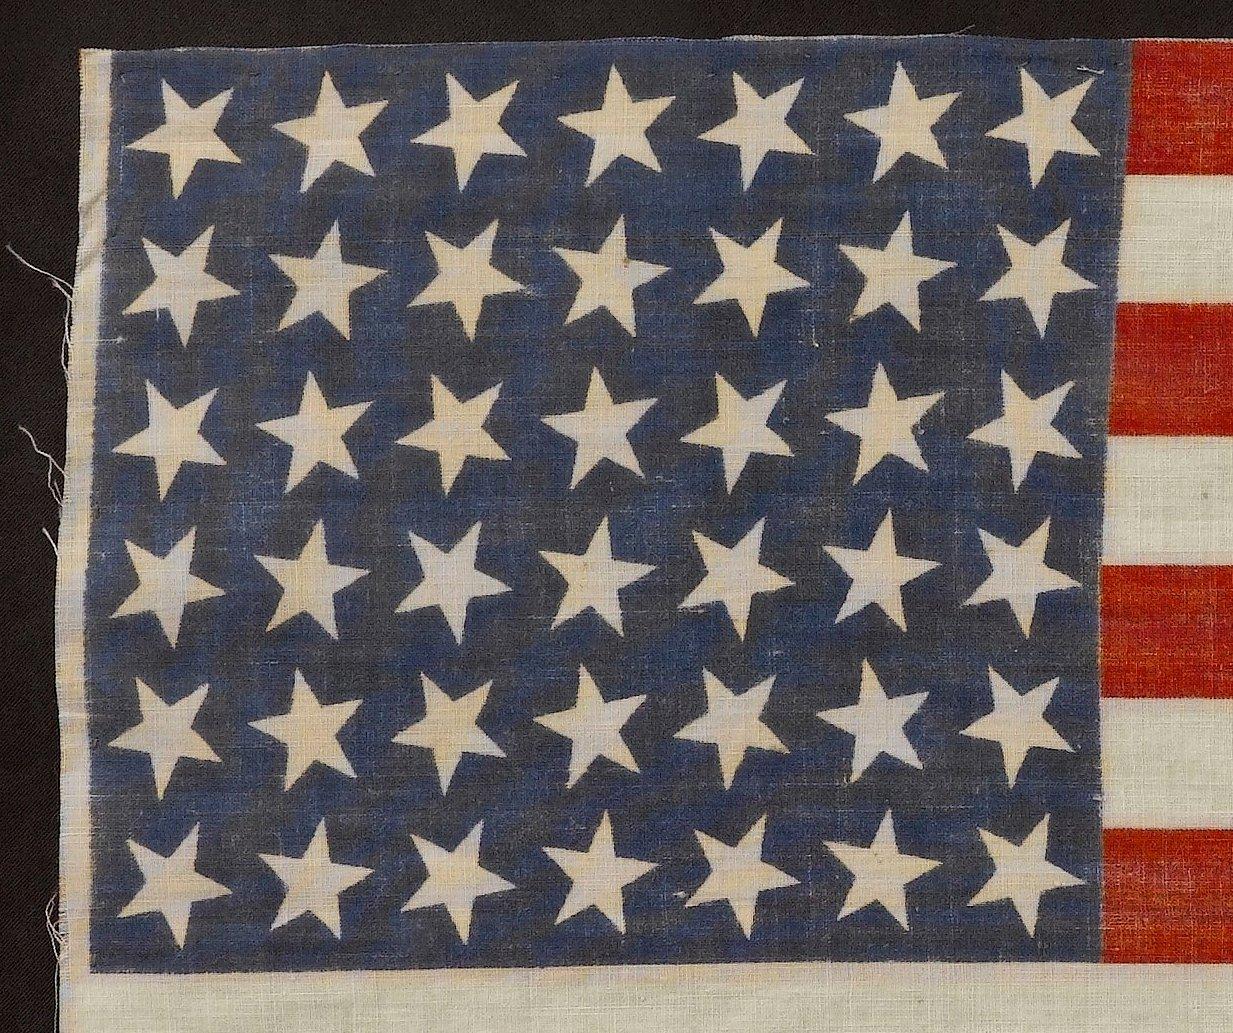 This is an uncommon 42-star flag, commemorating the addition of the state of Washington to the Union. The flag dates to 1889-1890, and is printed on cotton. The canton consists of six rows of seven dancing stars, which is an unusual star pattern.